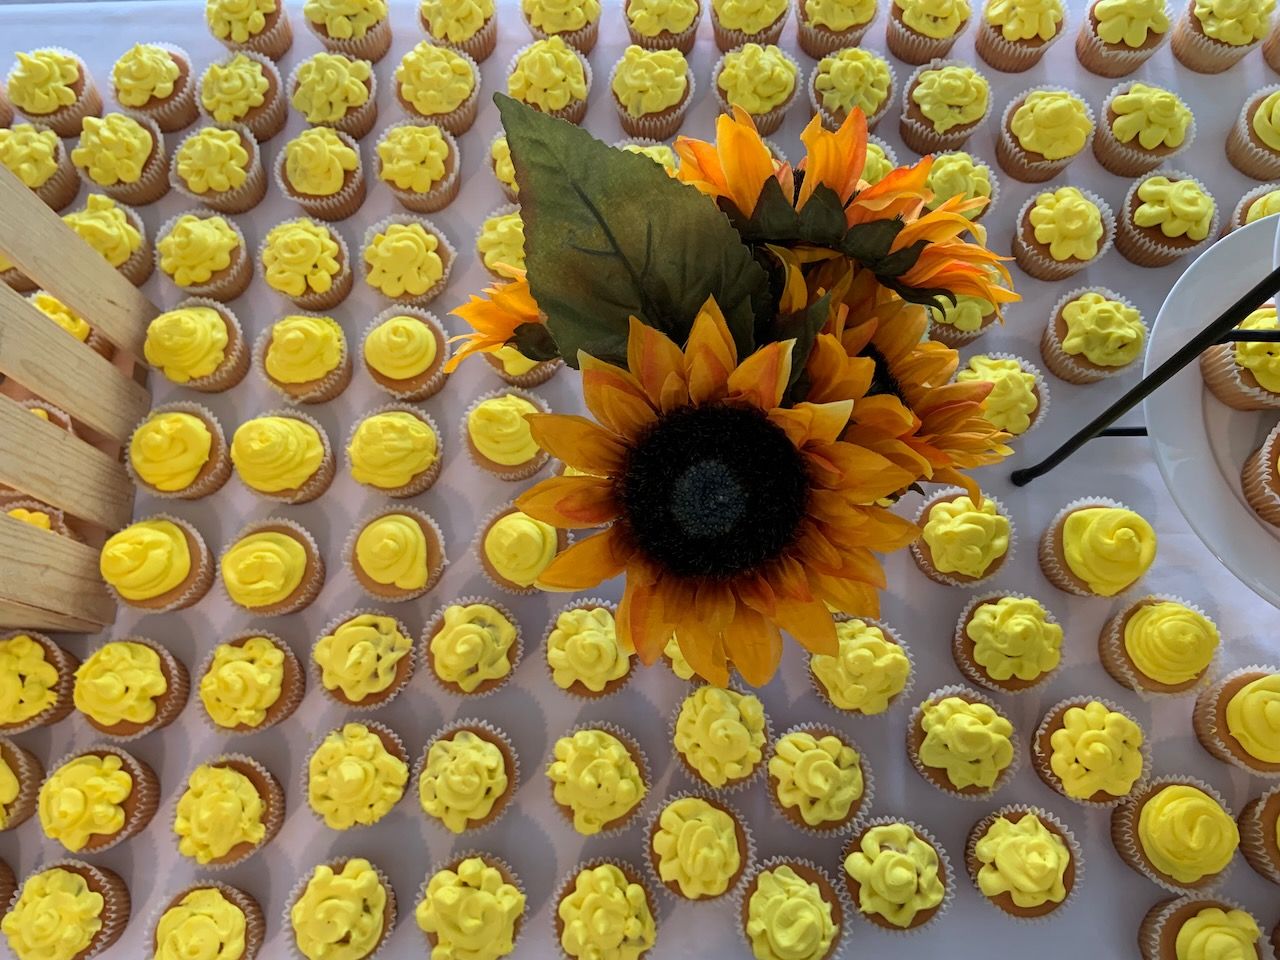 vase of sunflowers placed amid rows of cupcakes with yellow icing on a party table